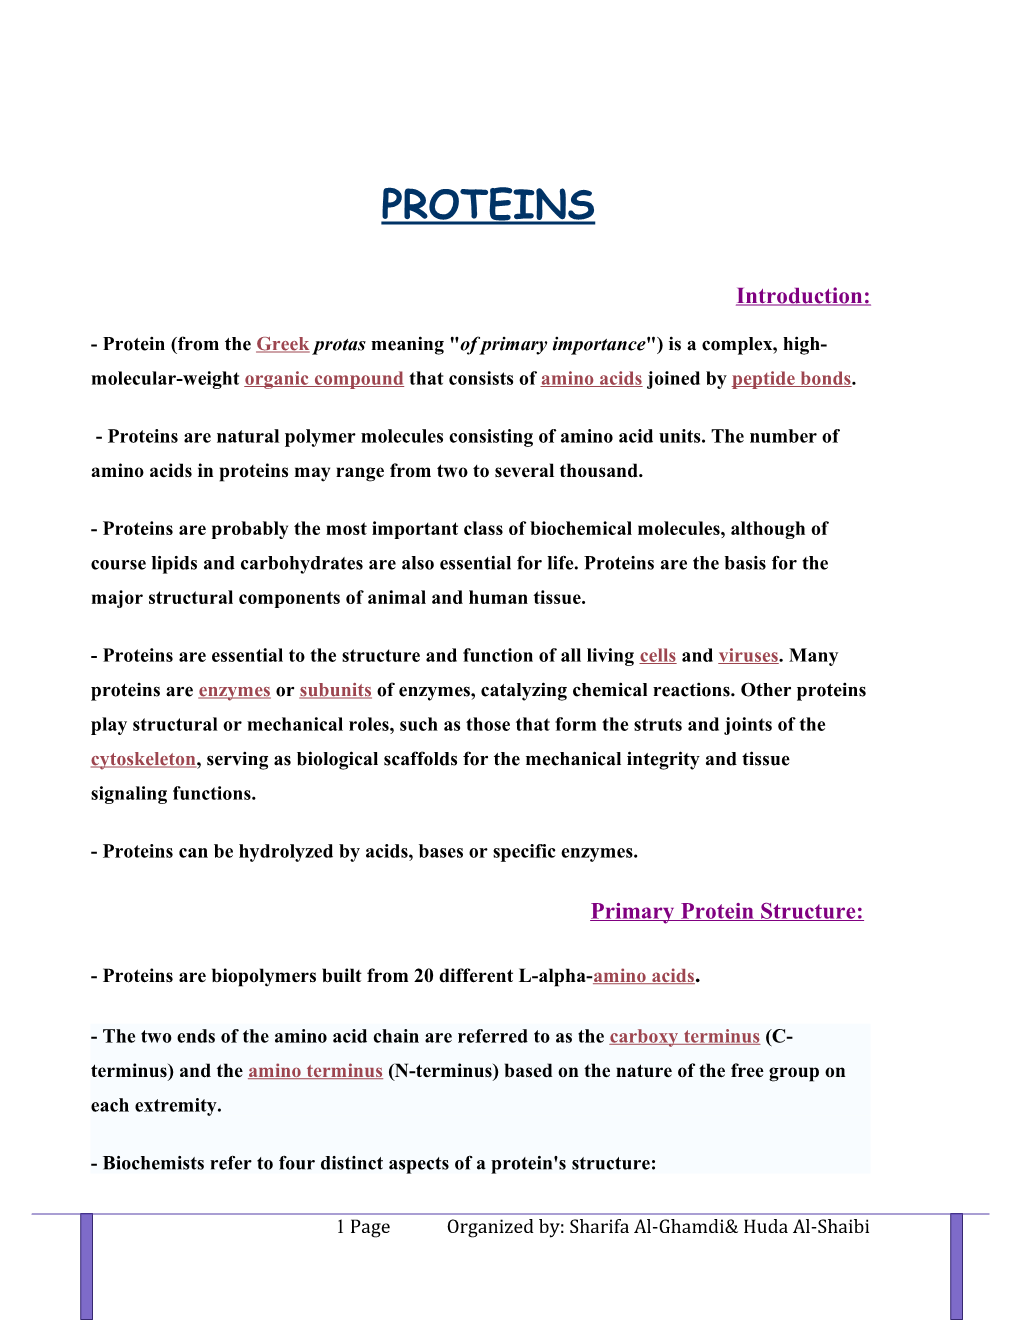 Proteins Can Be Hydrolyzed by Acids, Bases Or Specific Enzymes